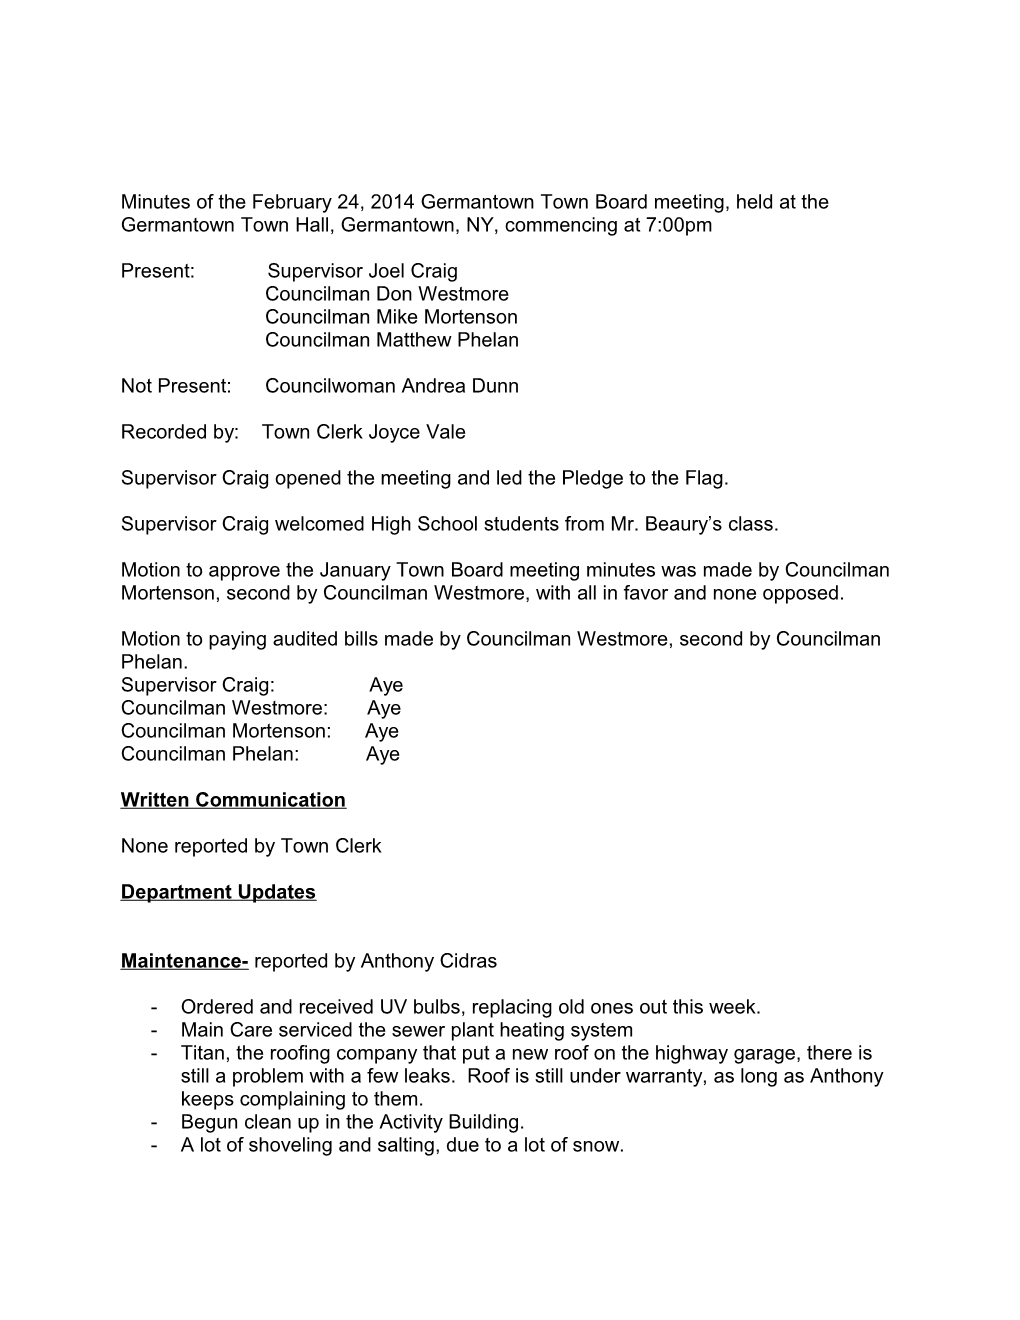 Minutes of the February 24, 2014 Meeting